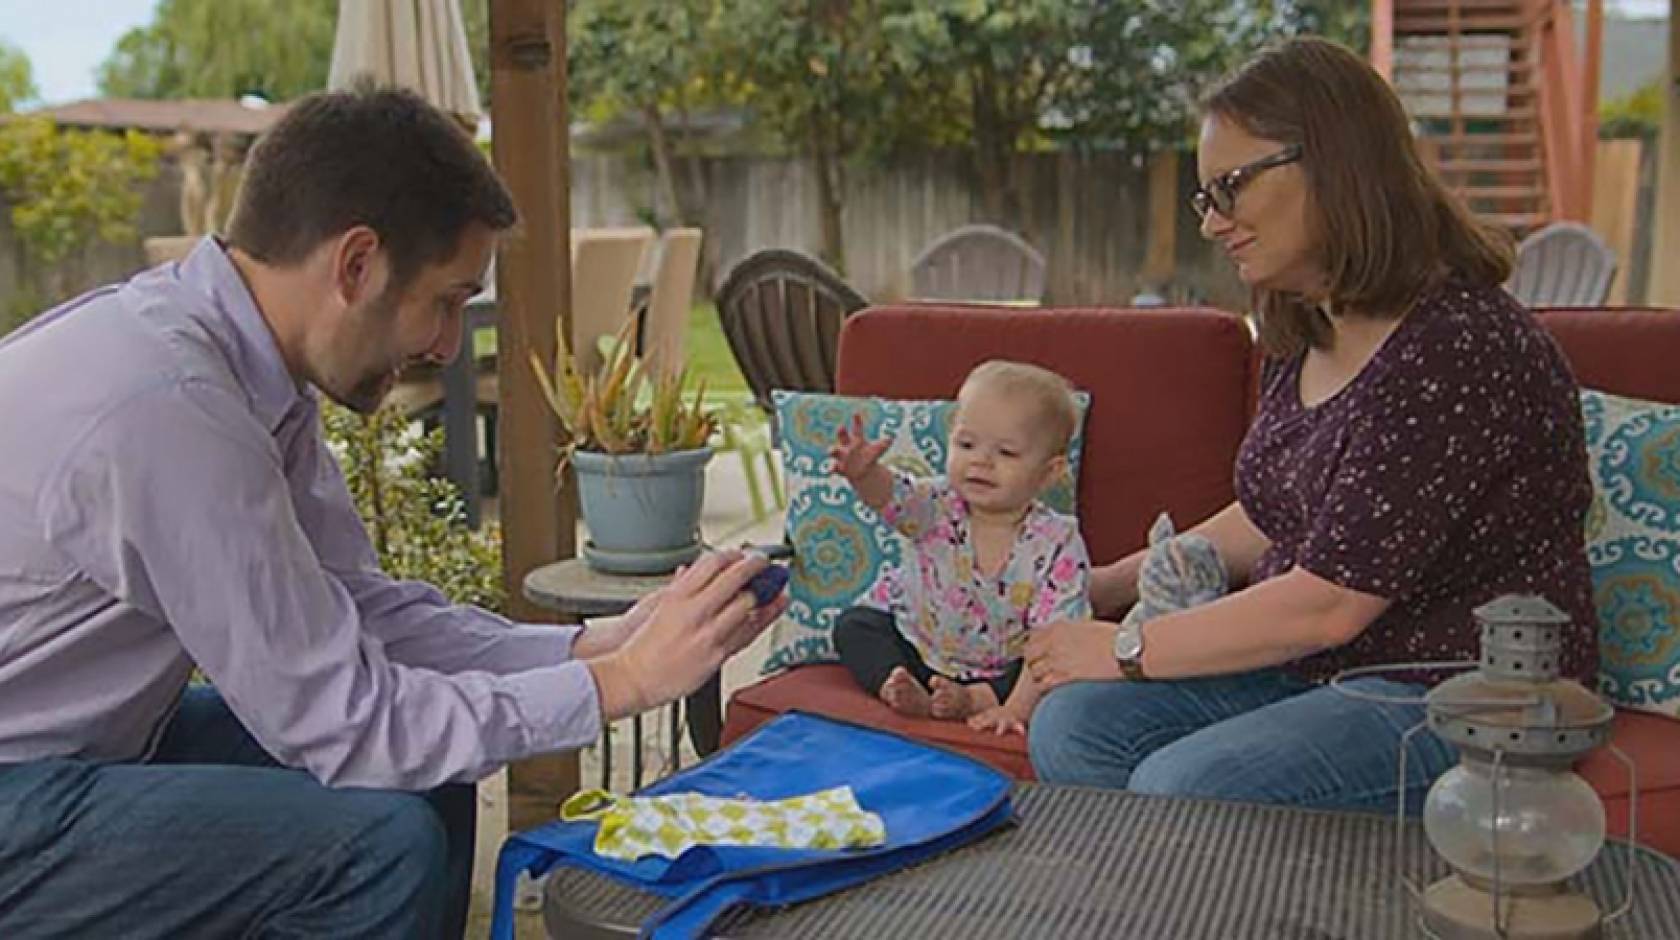 Professor Eric Walle with Penelope and her mom, Jessica Mohatt, in a scene from the new Netflix docu-series "Babies."